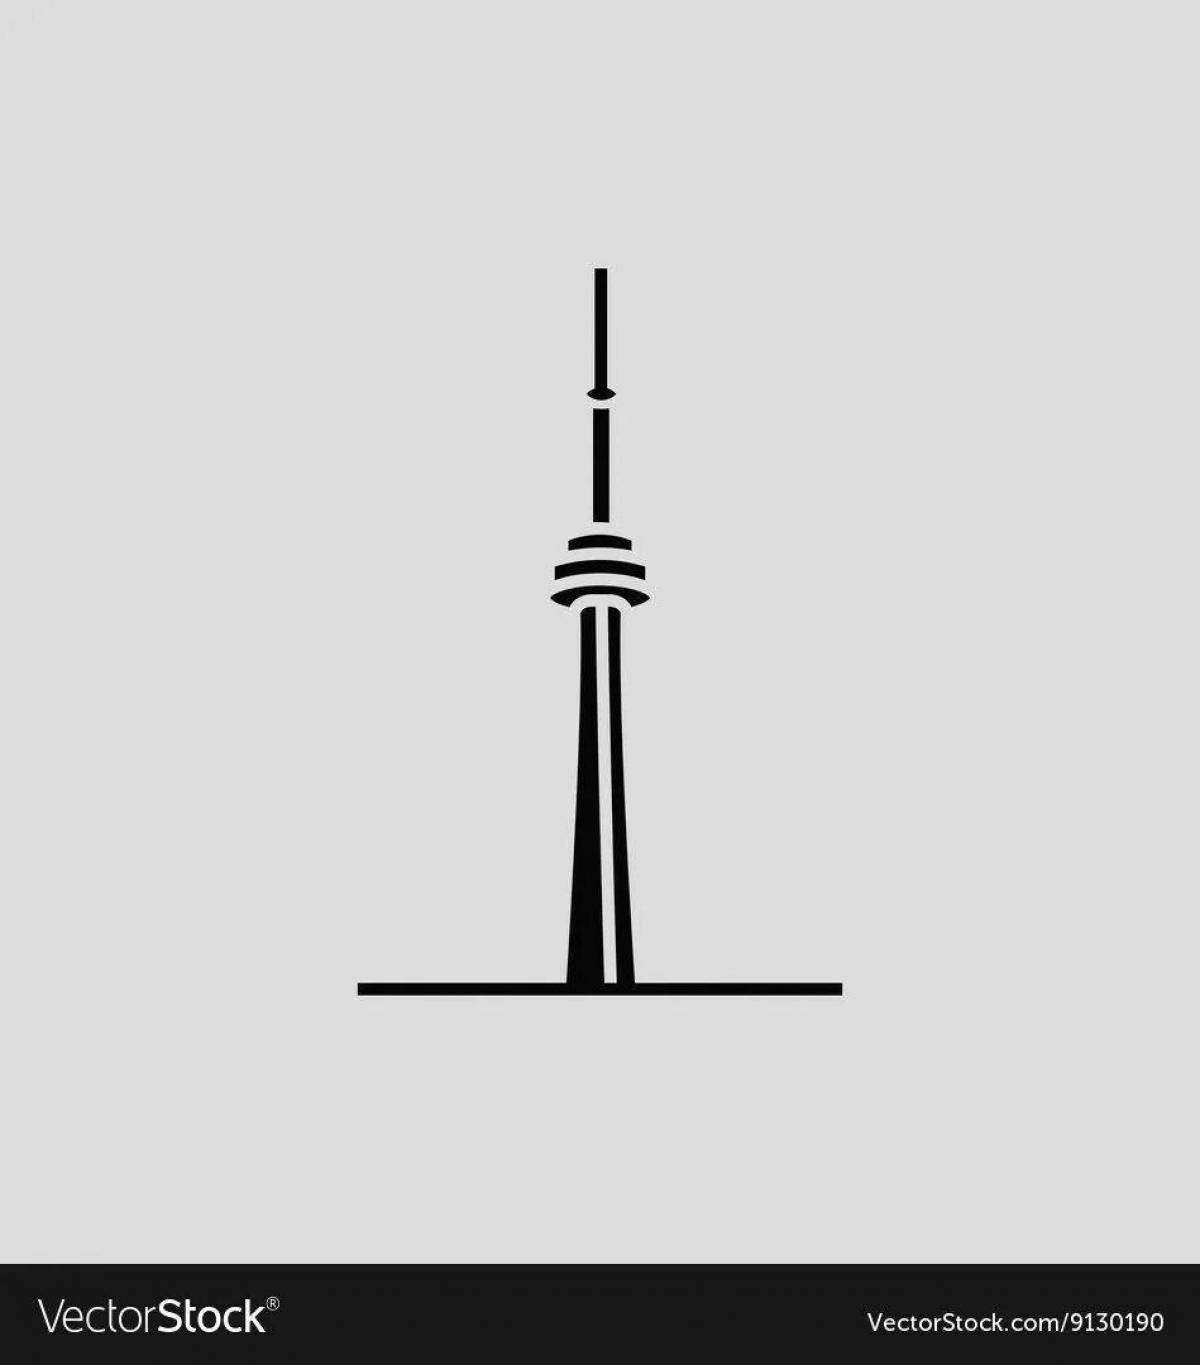 Exquisite CN tower coloring book